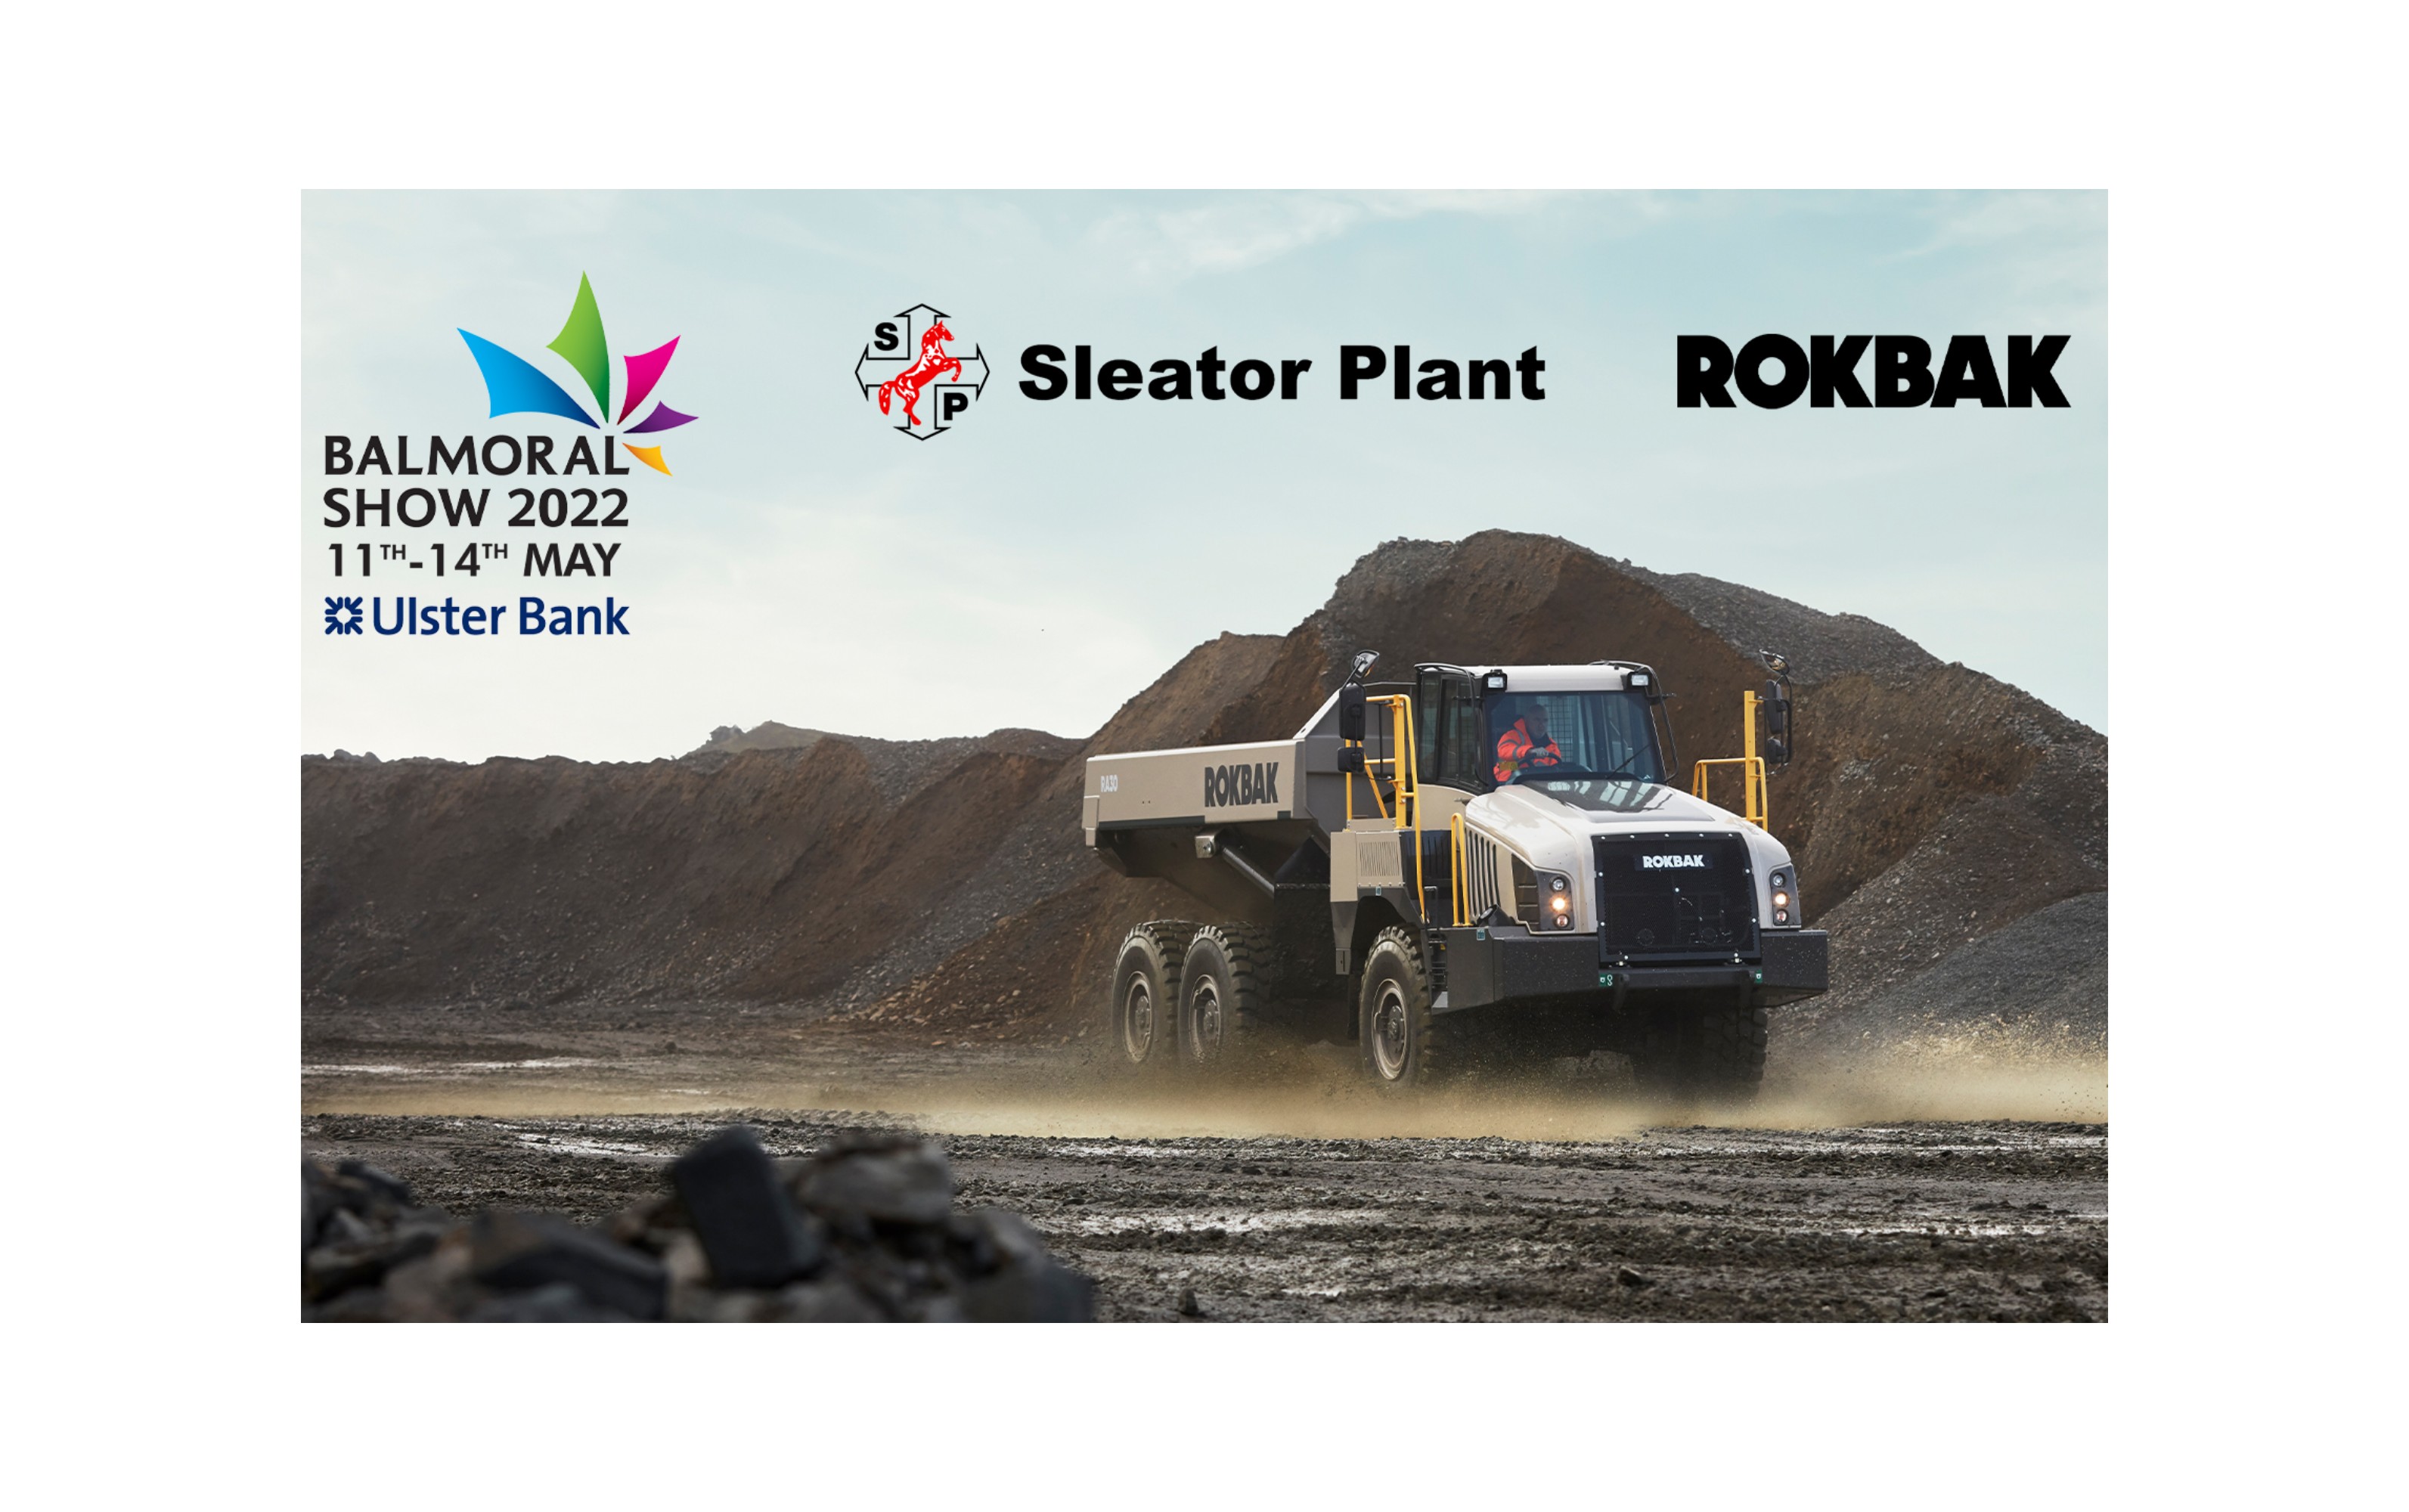 Rokbak will join Sleator Plant, the company’s dealer for Northern Ireland, at the Balmoral Show